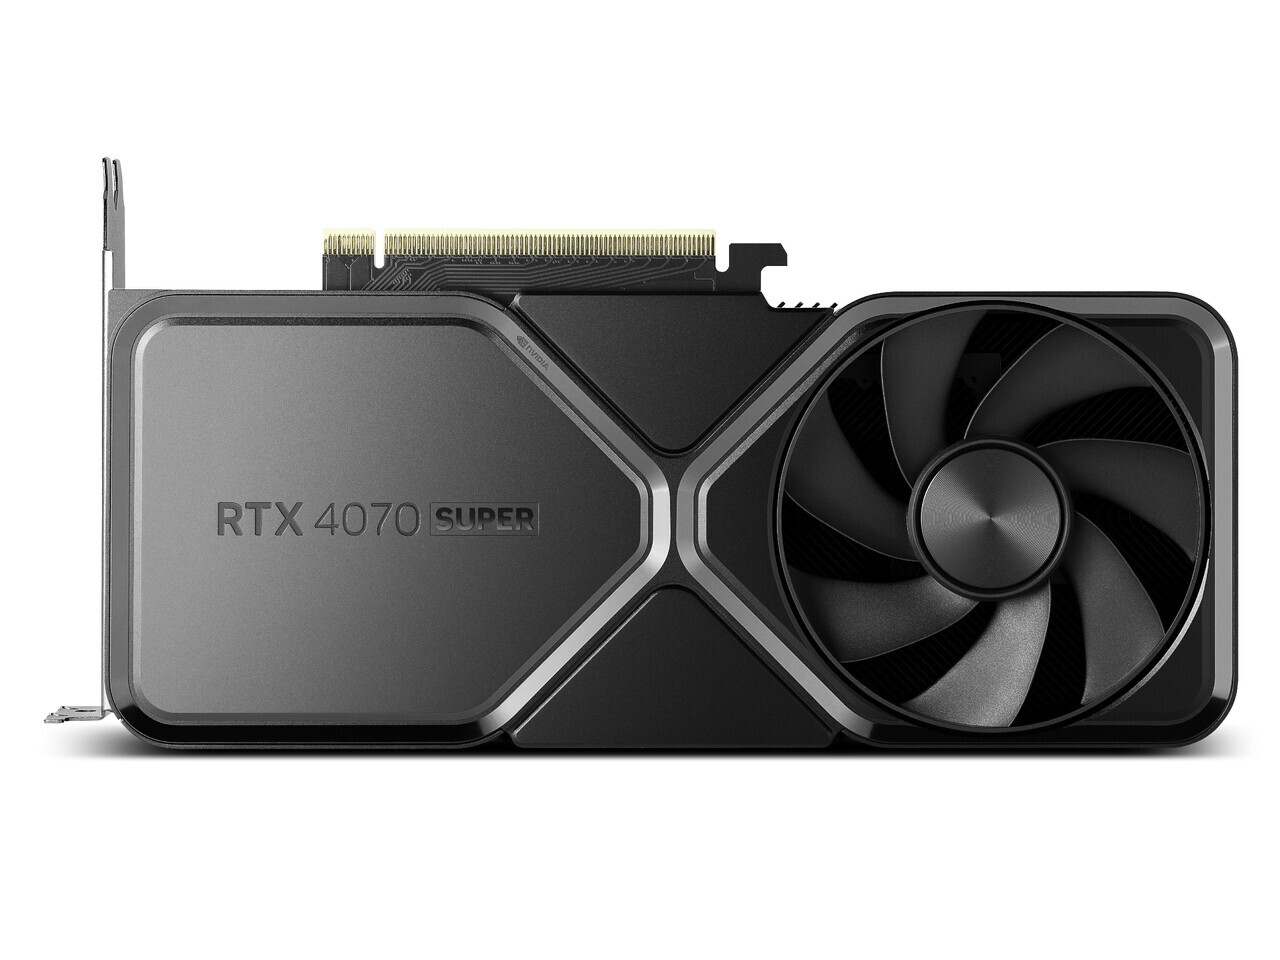 NVIDIA GeForce RTX 4070 SUPER Goes on Sale, Starting at $599